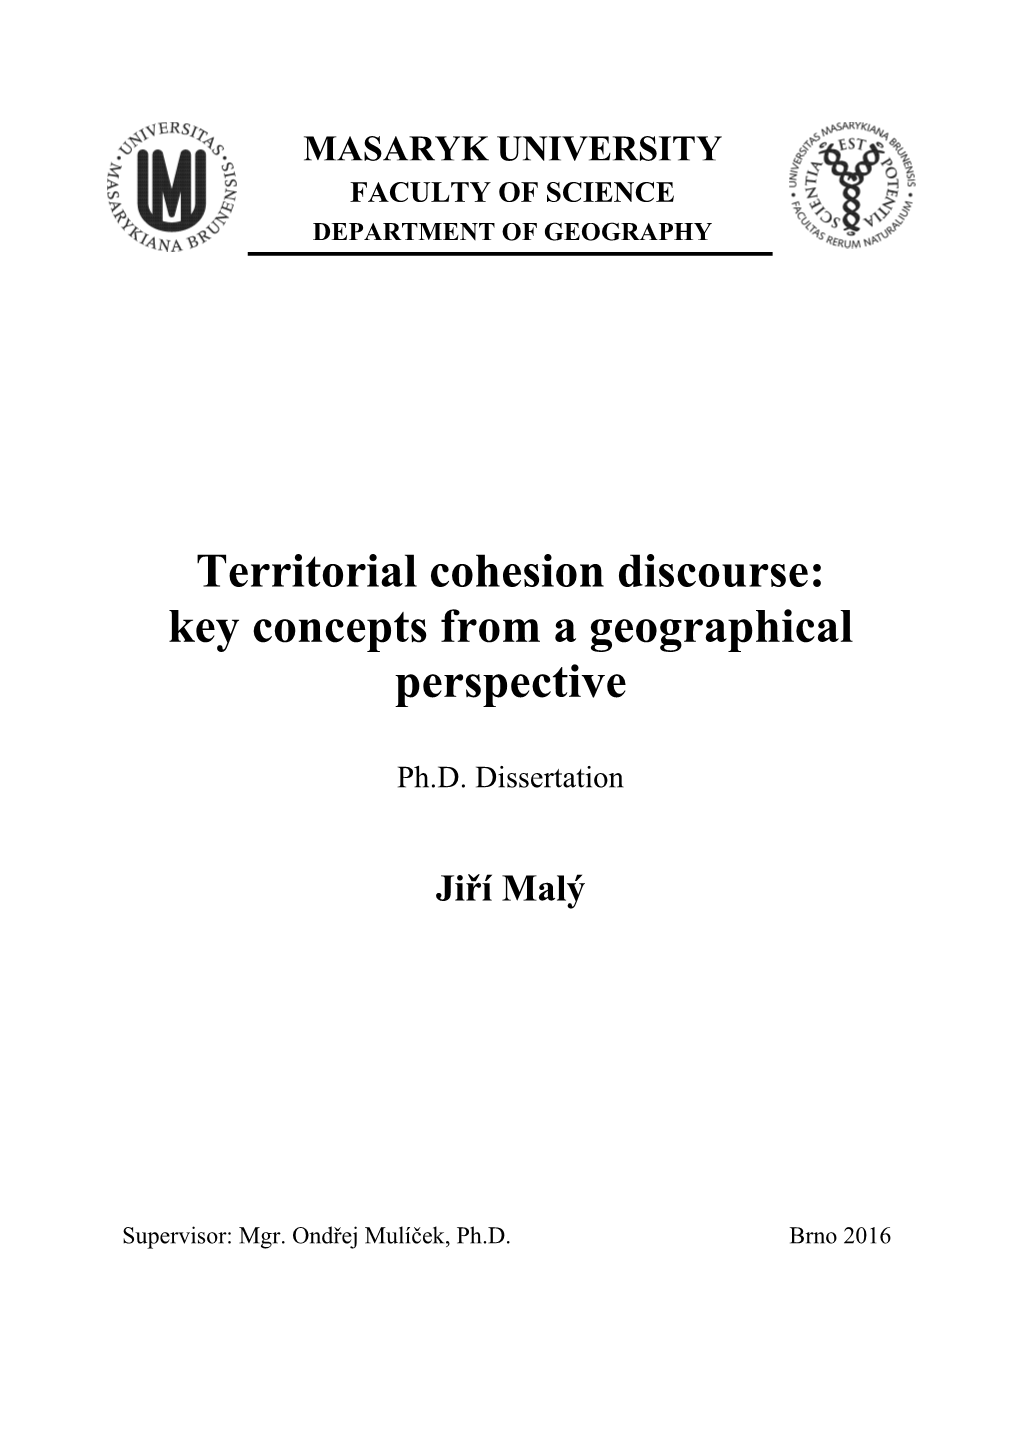 Territorial Cohesion Discourse: Key Concepts from a Geographical Perspective